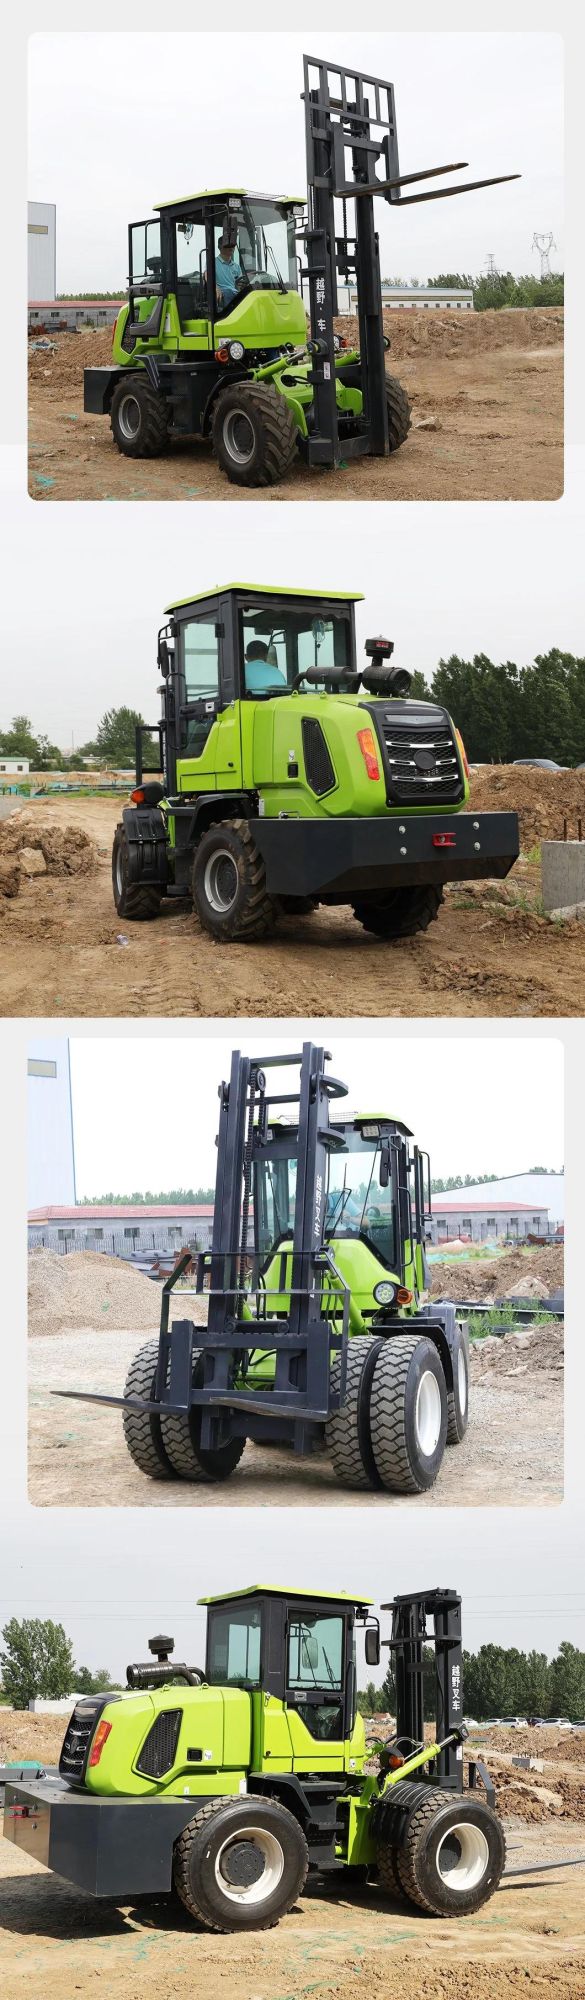 Widely Used Superior Quality 3 5 Ton Diesel Cross-Country Lift Loading and Unloading Forklift Truck Forklifts for Sale